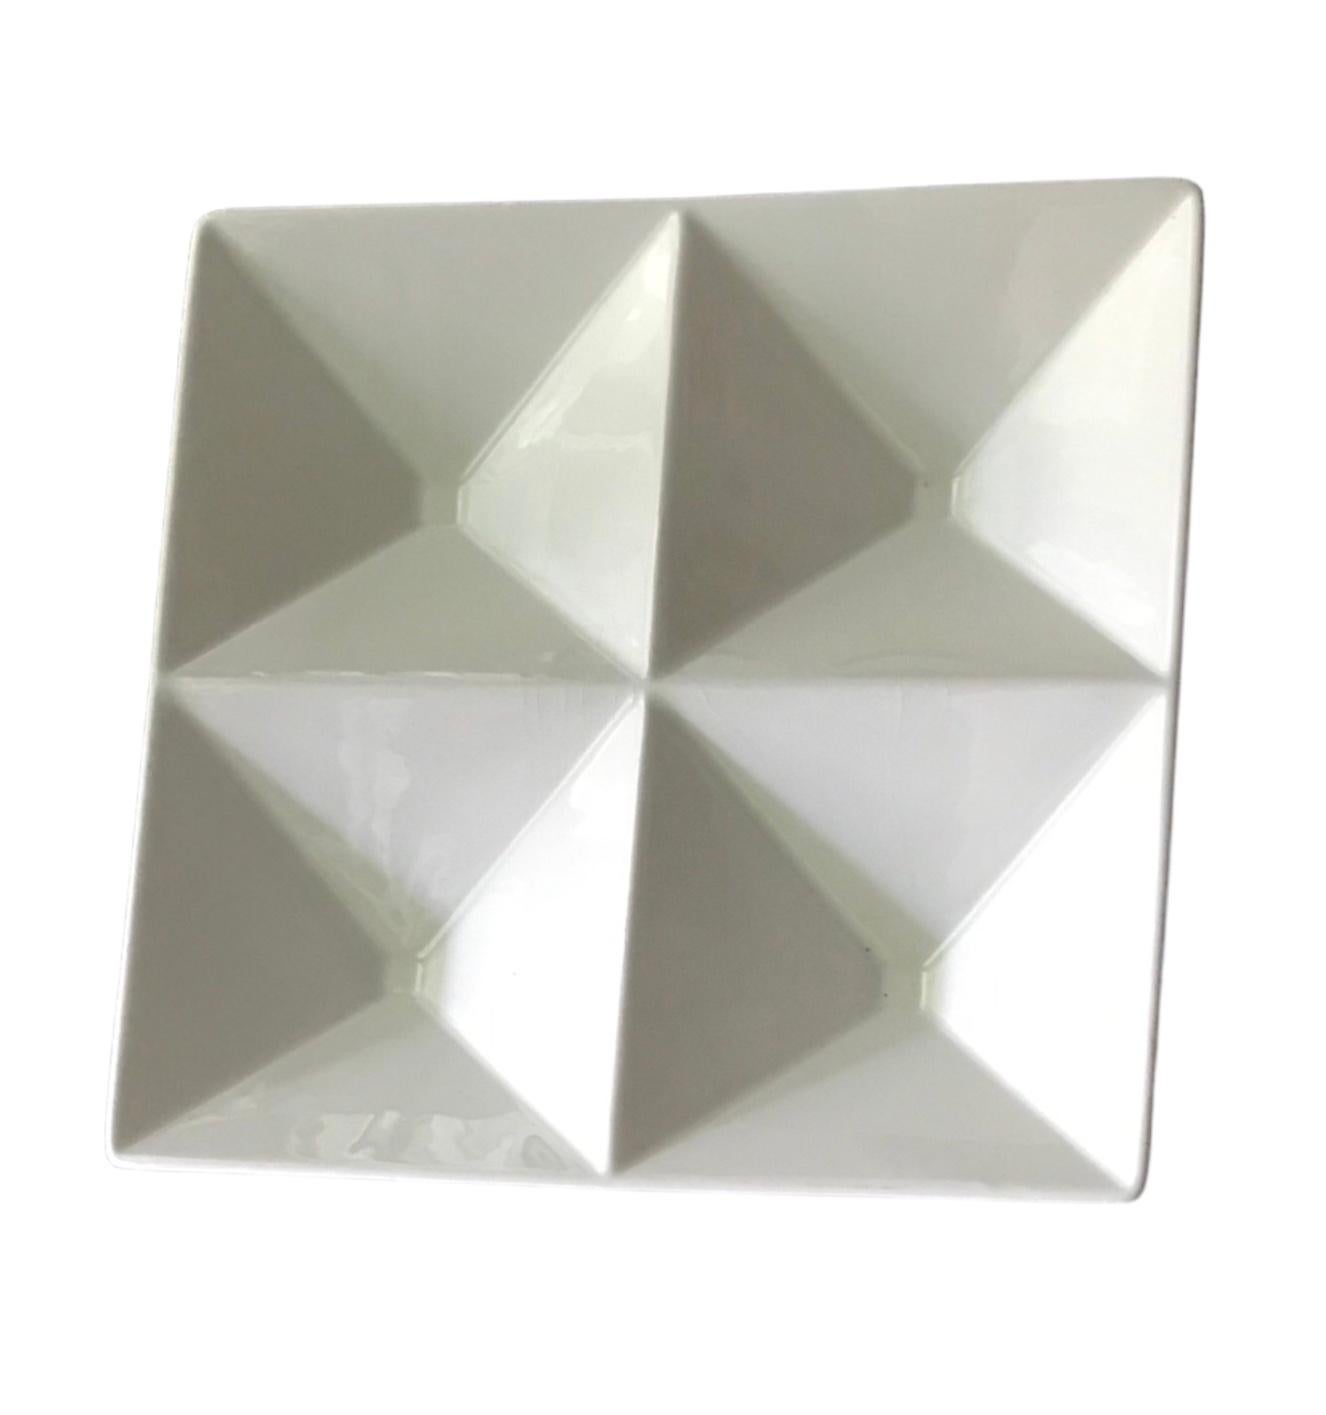 Fin Design Mid Century Modern platter created in 1957 by Kaj Franck (1911-1989) the Origami design for Arabia (now owned by iitala) platter is timeless with its slick and geometric Space Age Modern style. Four sharp angled compartments design would